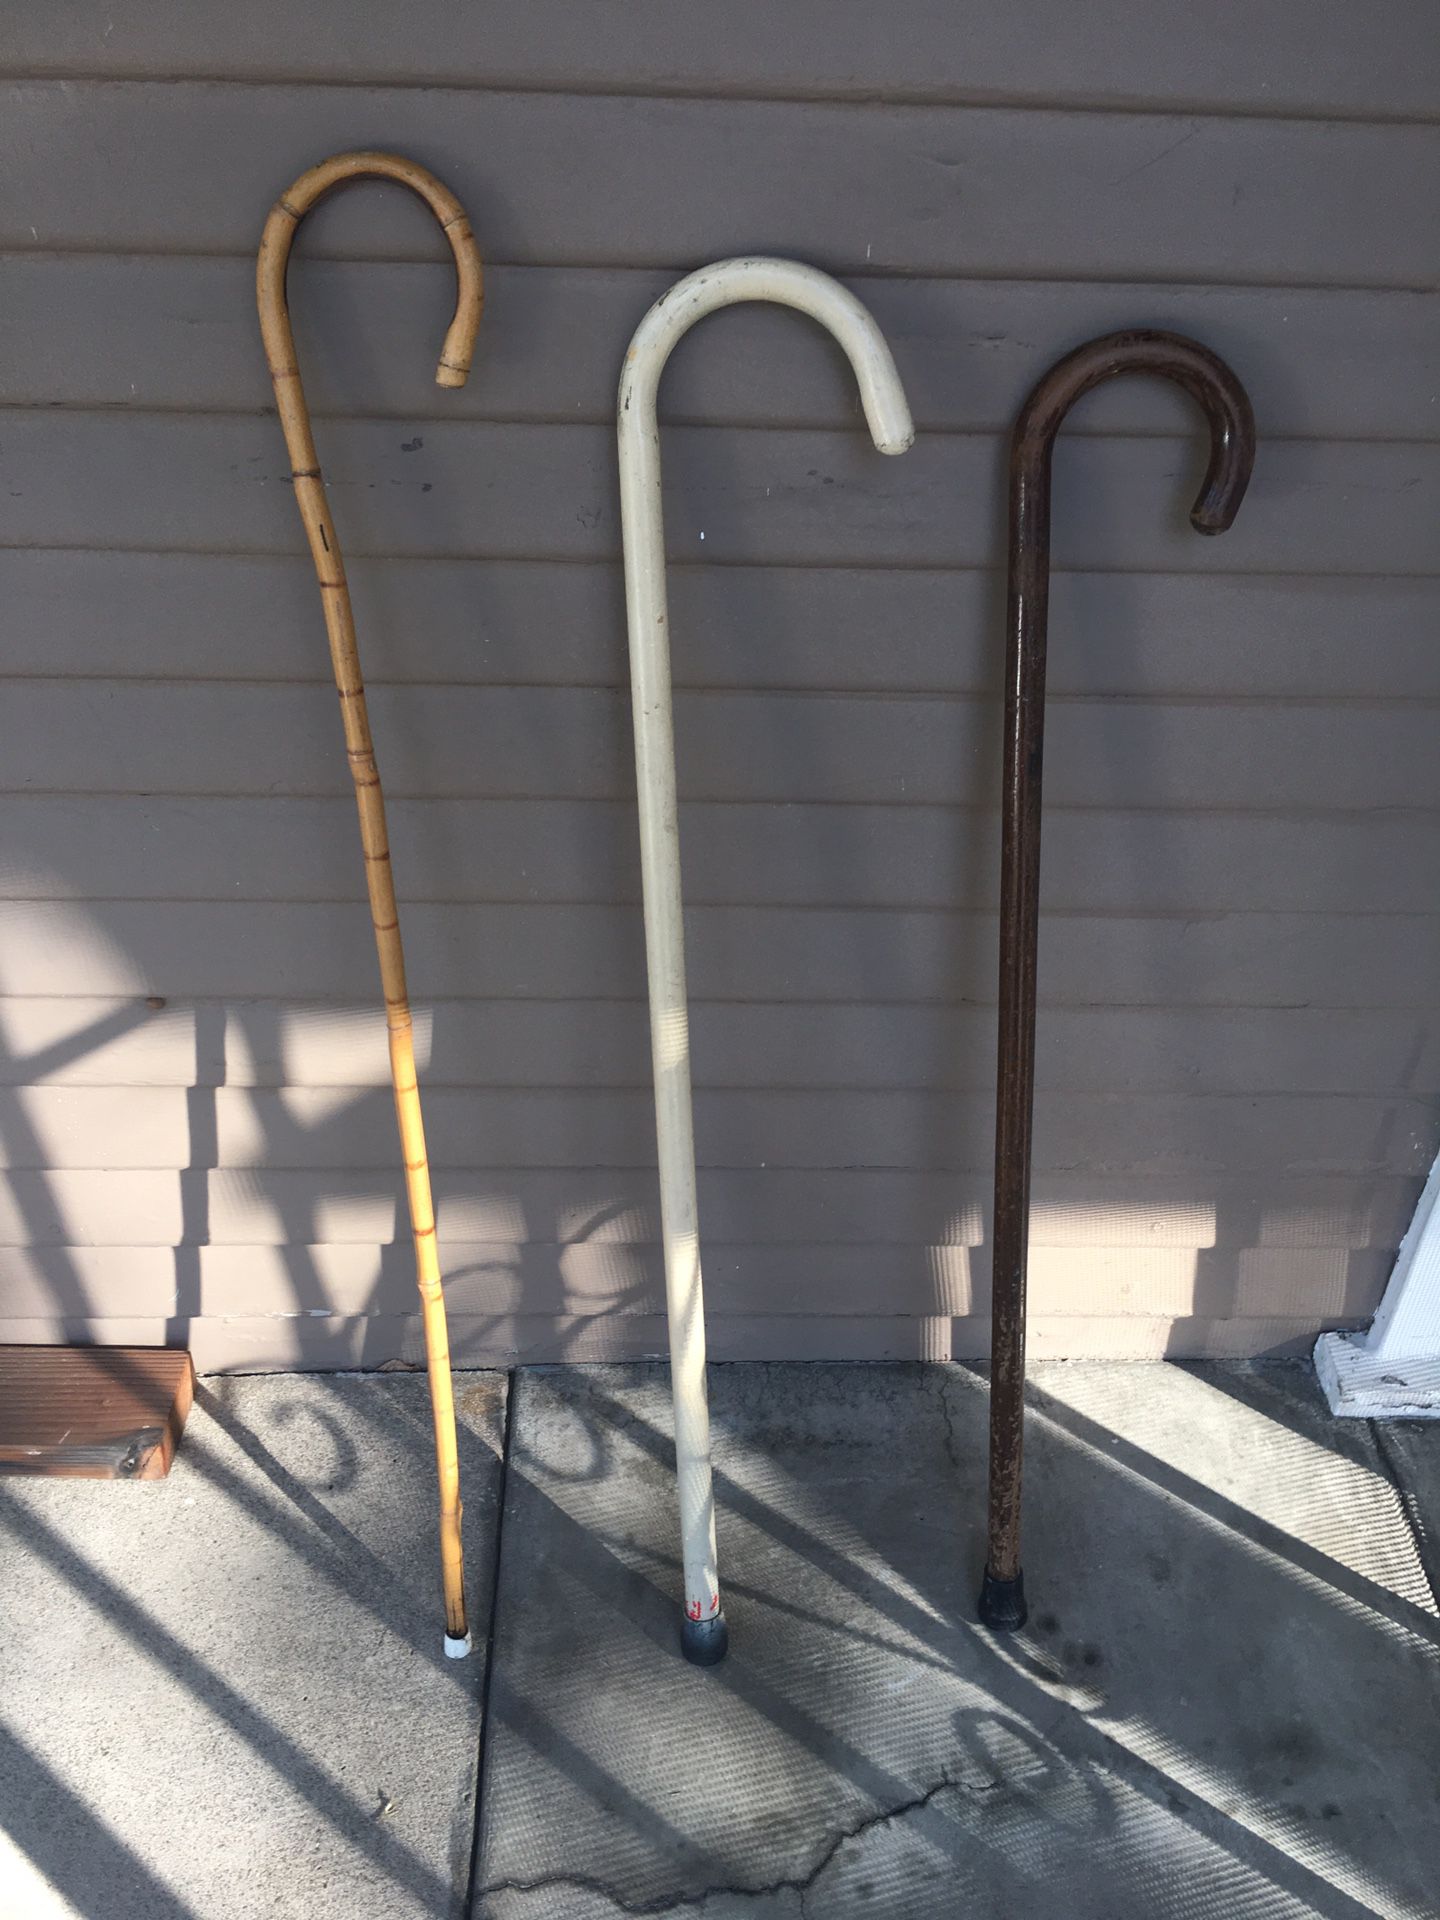 Walking Canes - ALL for $5!